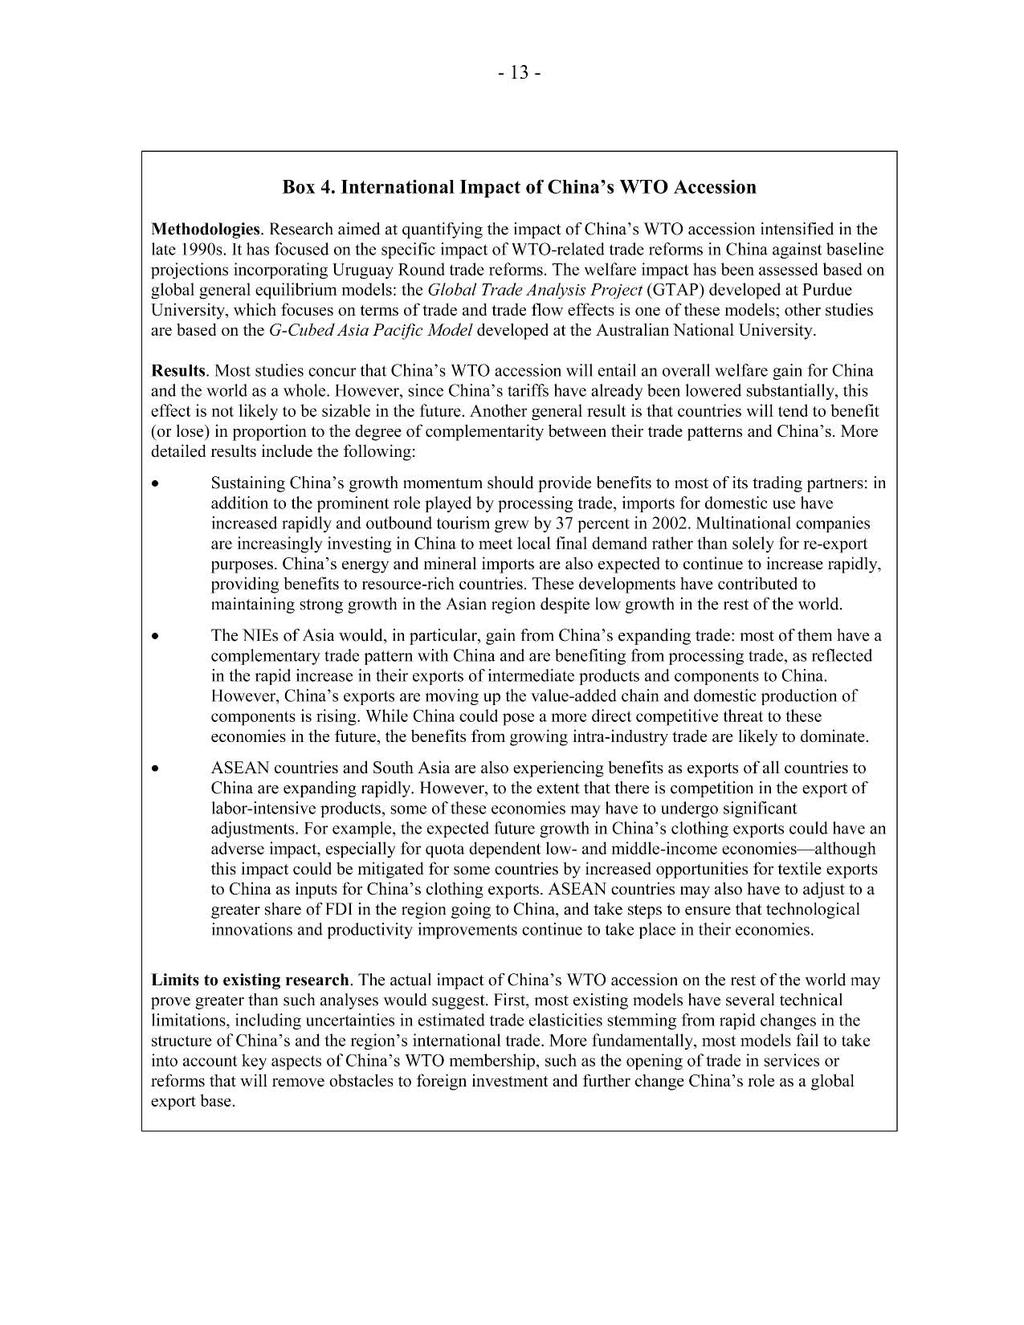 -13- Box 4. International Impact of China's WTO Accession Methodologies. Research aimed at quantifying the impact of China's WTO accession intensified in the late 1990s.